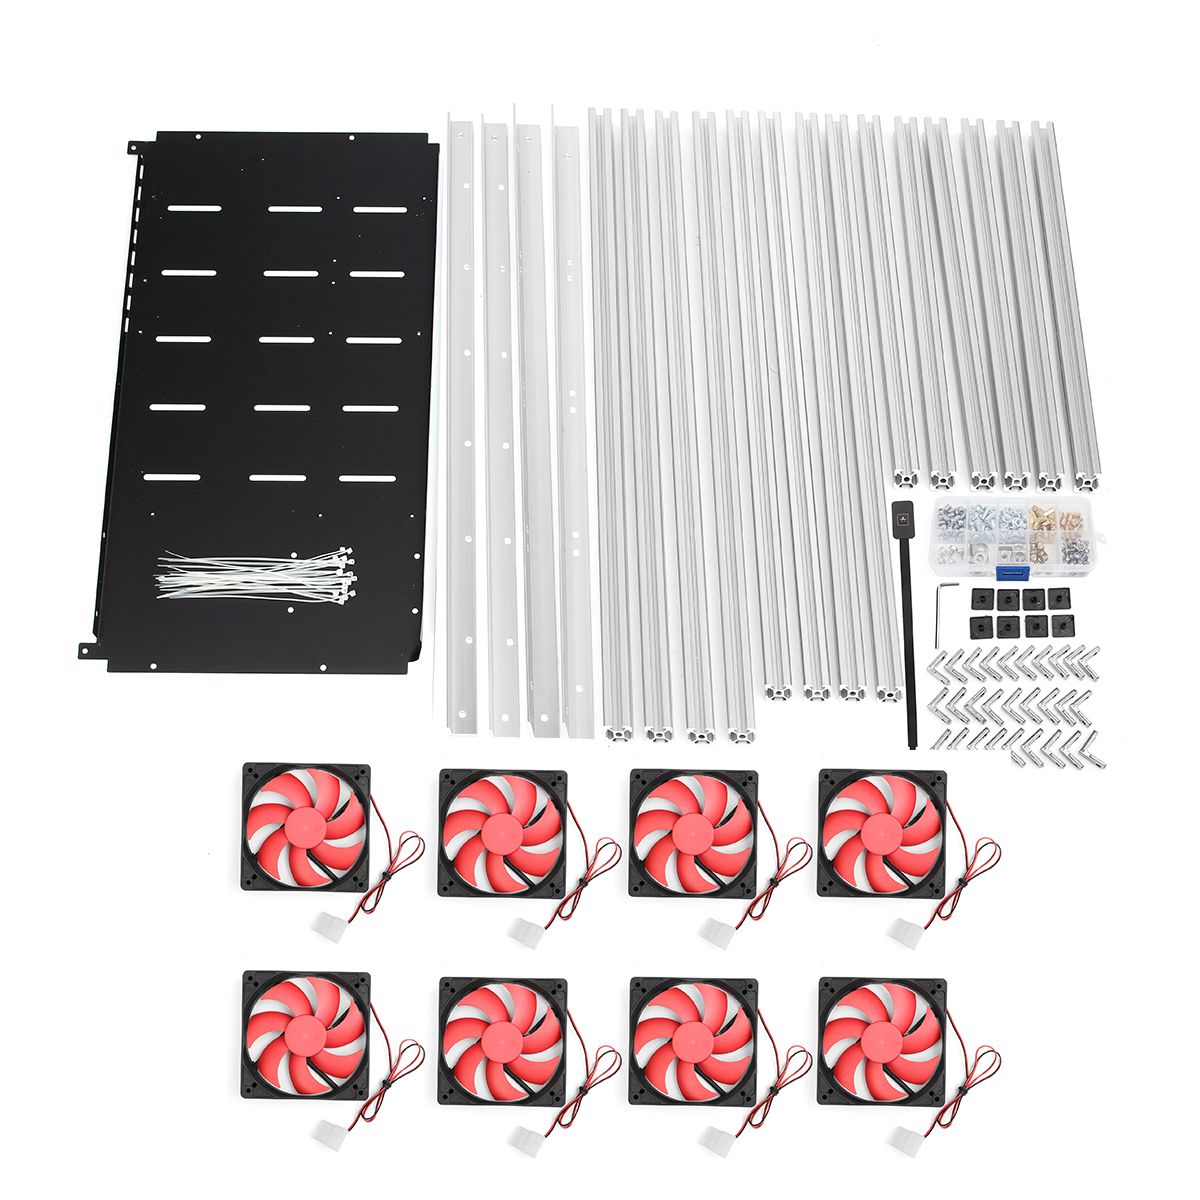 Aluminum-12-GPU-Open-Air-Mining-Rig-Frame-Case-With-8-LED-Fans-For-ETH-Ethereum-1208353